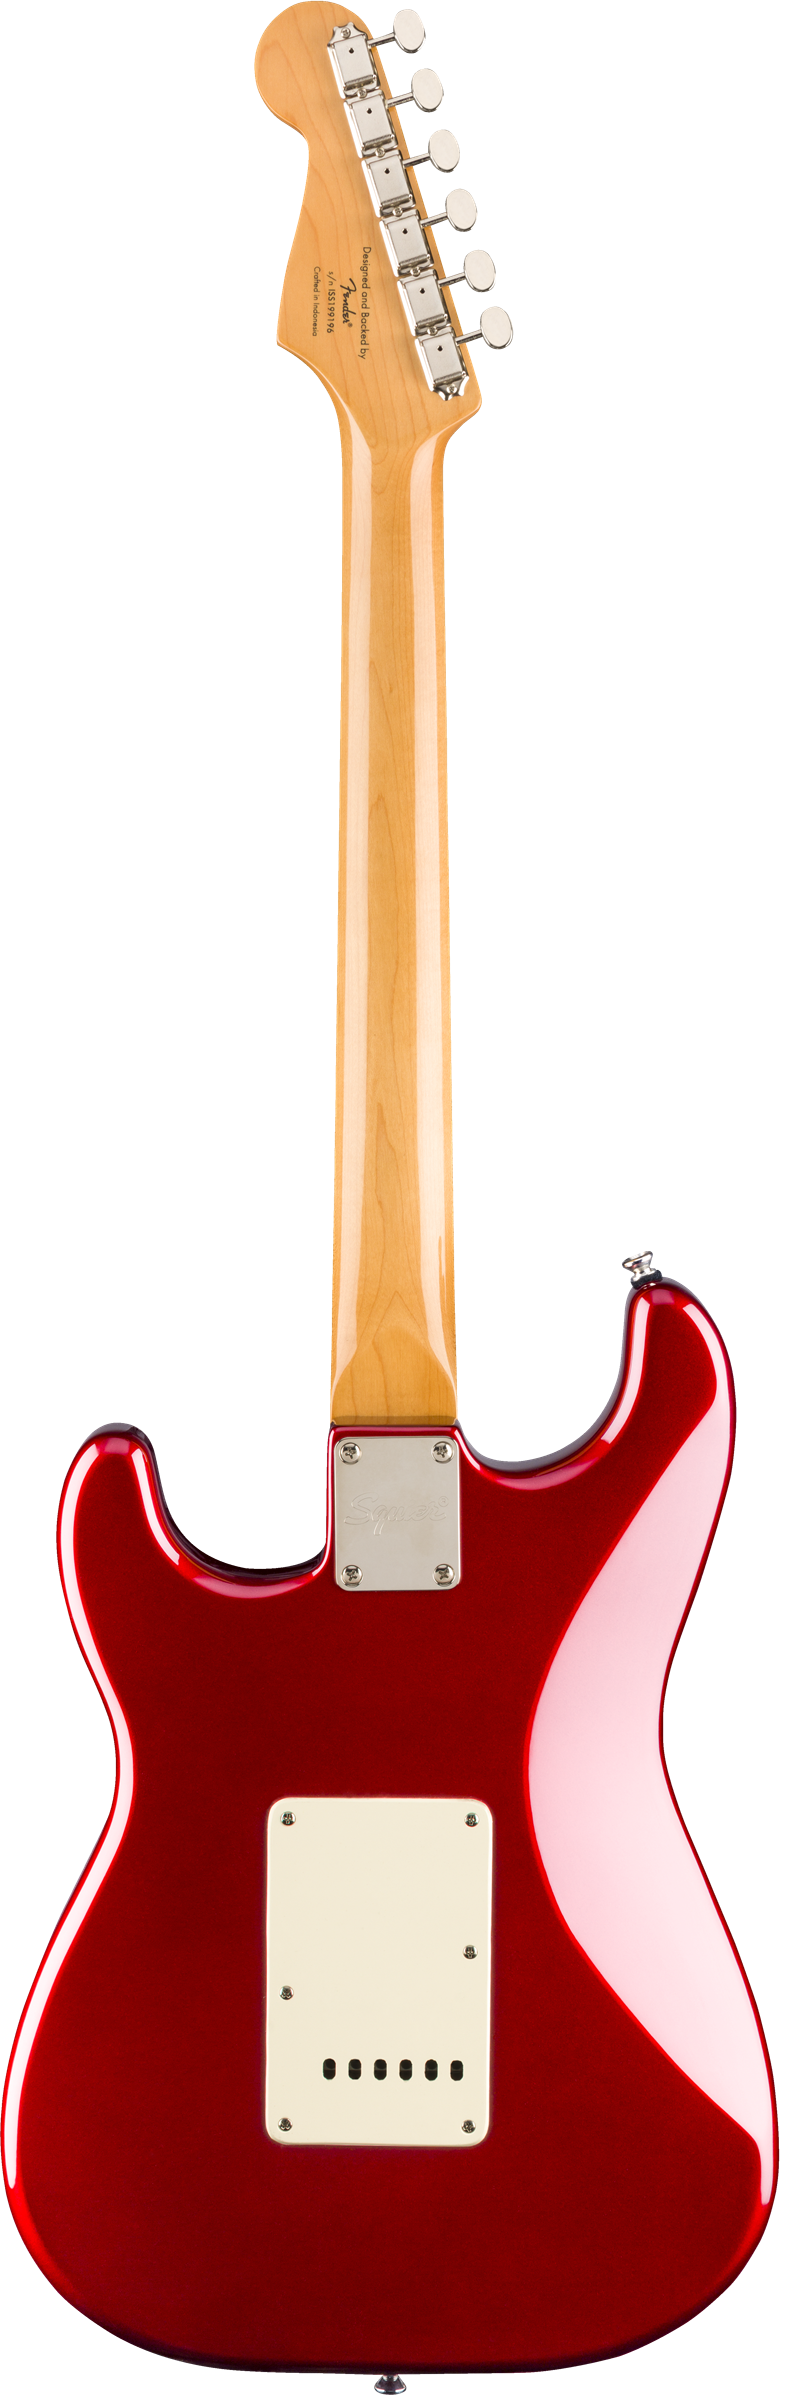 Stratocaster Classic Vibe 60s car Candy Apple Red